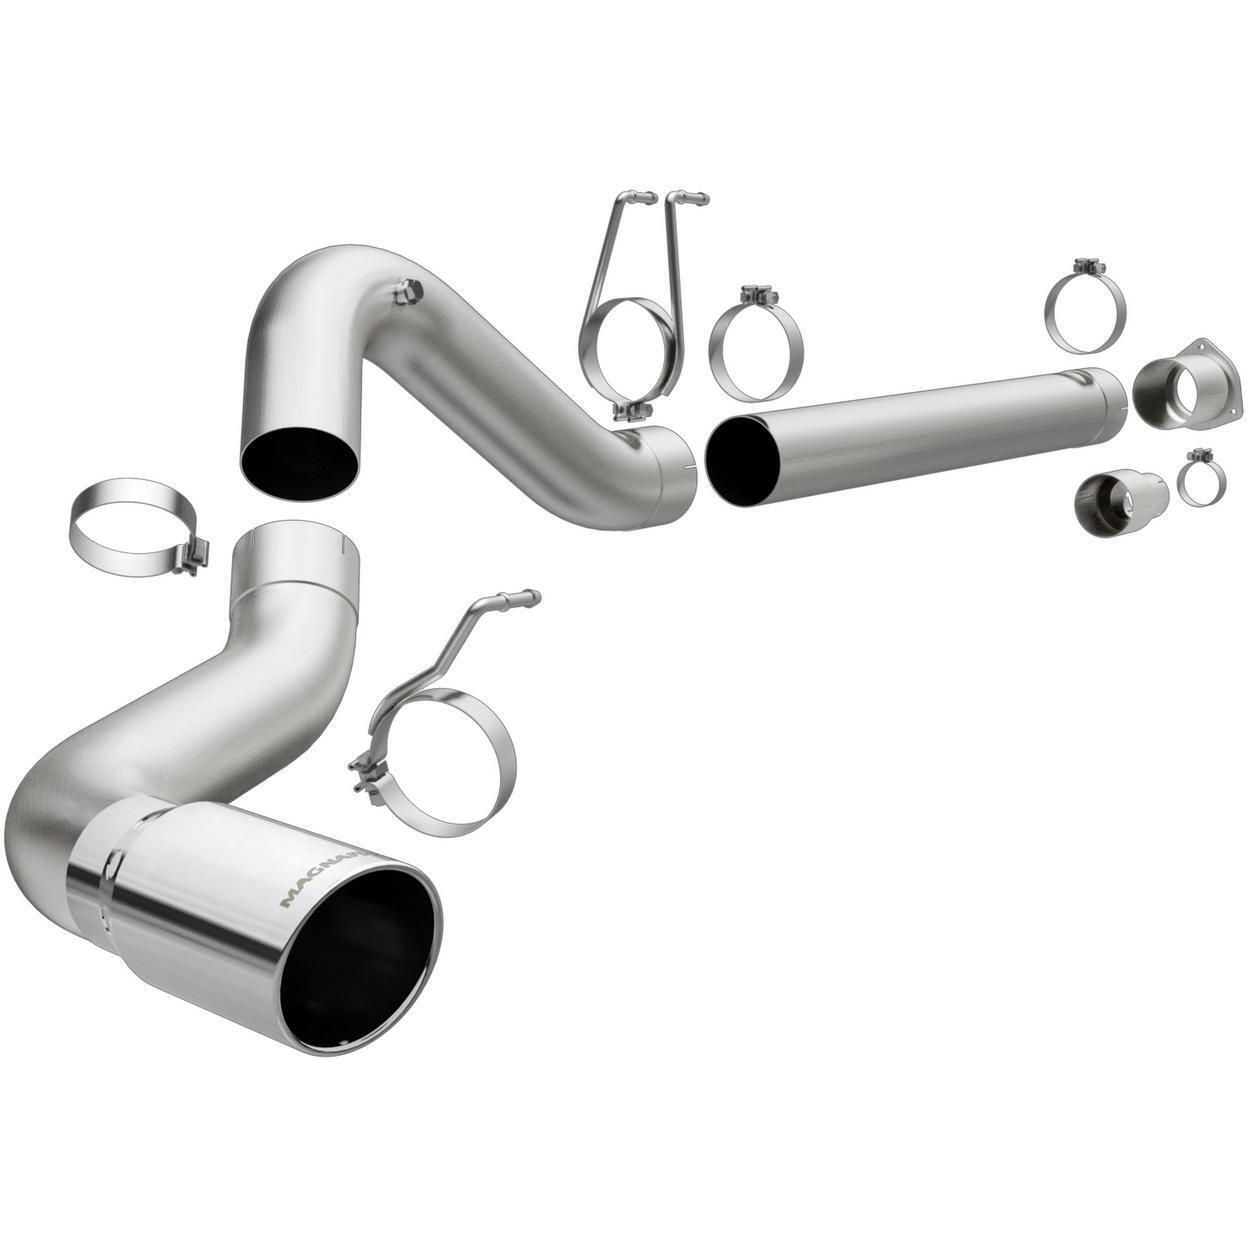 Exhaust System Kit for 2019-2020 Ford F-350 Super Duty